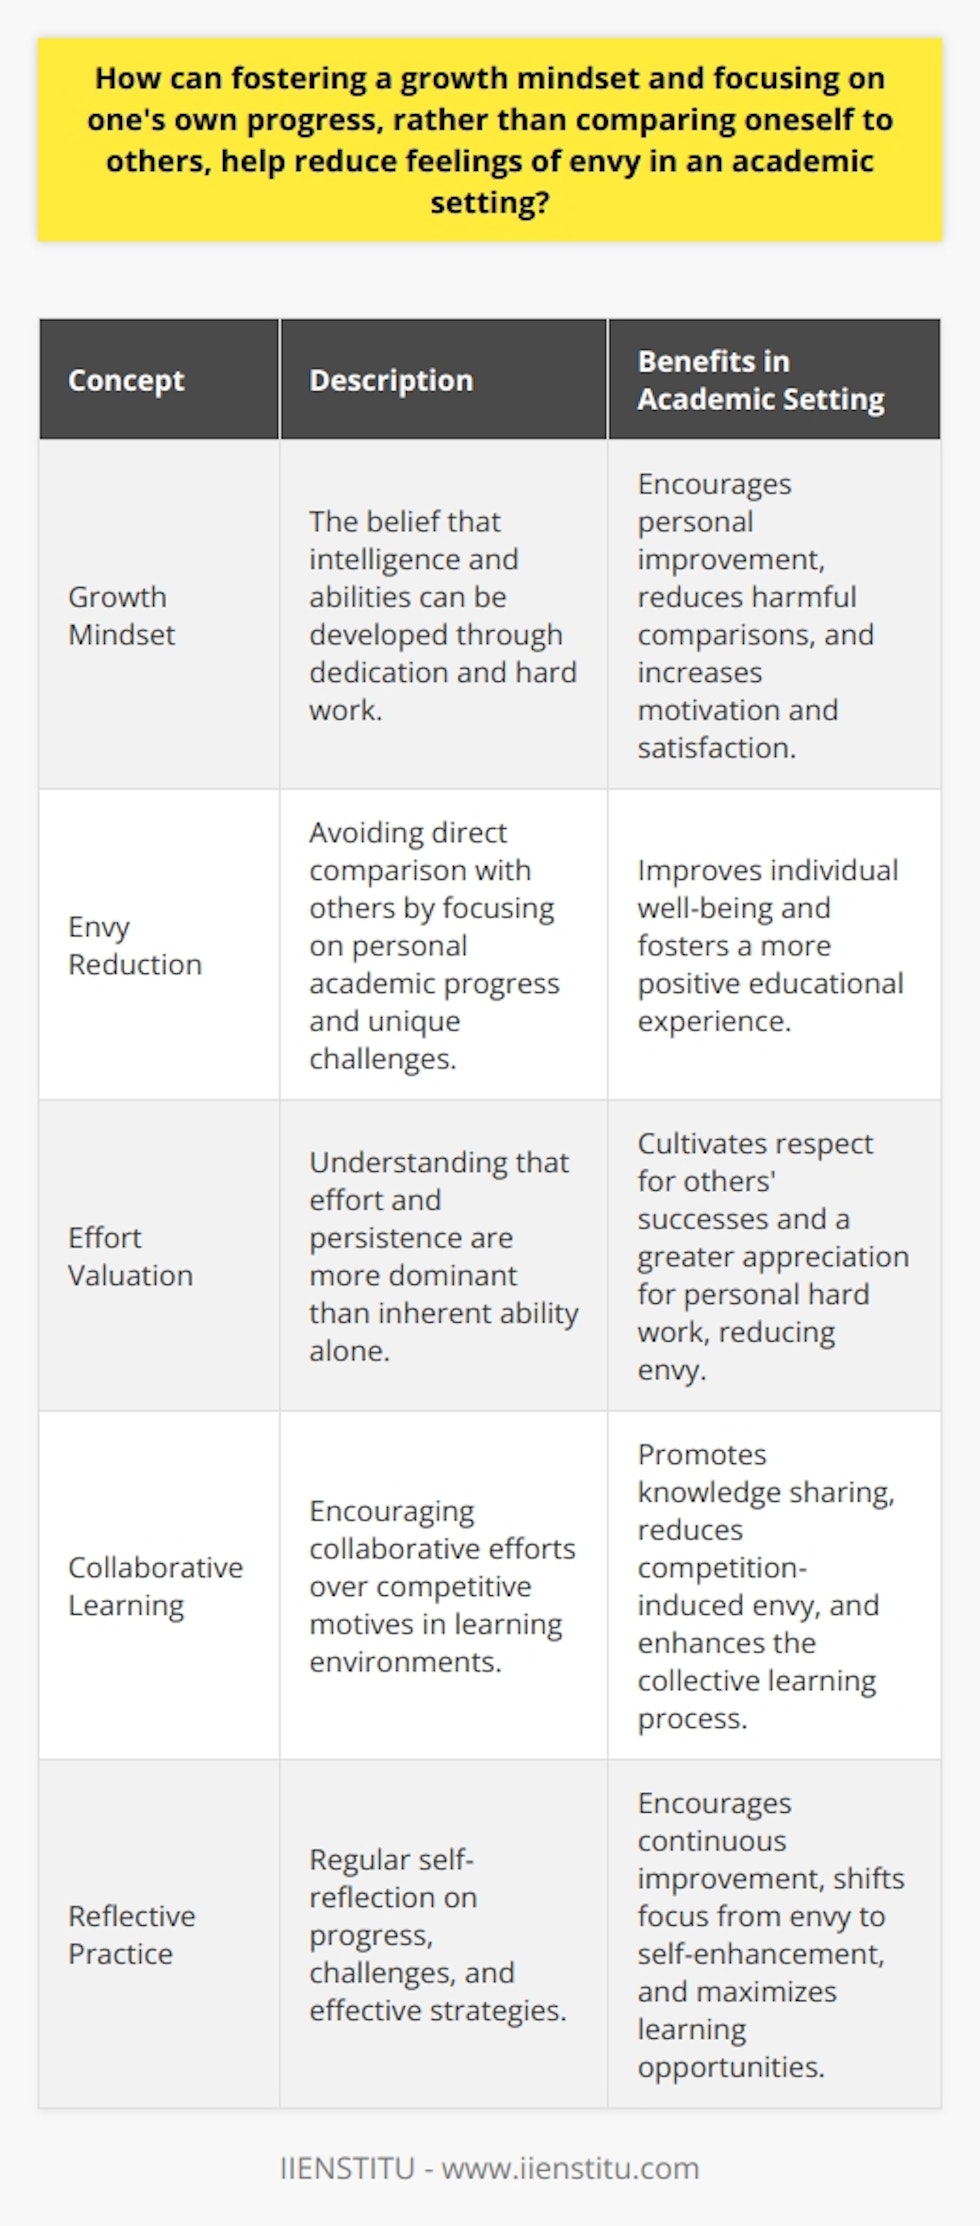 The cultivation of a growth mindset holds transformative power in academic environments—it shapes perceptions, influences behavior, and has the potential to minimize the pervasive sense of envy that can surface when individuals juxtapose their performance and achievements against those of their peers. But what exactly is a growth mindset, and how does it interact with feelings of envy within the context of learning and intellectual development?**Understanding Growth Mindset and Its Impact**Initially conceptualized by psychologist Carol Dweck, a growth mindset is centered around the belief that one's abilities and intelligence can be developed through dedication and hard work. This mindset is contrasted with a fixed mindset, where the belief is that such traits are static and unchangeable. In academic settings, a growth mindset therefore empowers students to prioritize personal betterment over static evaluation, offering a pivotal shift in how they perceive their educational journey.**Reducing Envy through Self-Growth Awareness**Feelings of envy often stem from comparison. It is a psychological response triggered when noticing disparities between oneself and others, especially when others seem to possess desirable attributes or successes. Envy can be detrimental, leading to decreased motivation, satisfaction, and well-being. A growth mindset acts as a mitigating factor by discouraging direct comparison with others. Instead, the focus is drawn toward evaluating one's own progress over time. Recognizing that each student has different starting points, challenges, and resources, a growth mindset encourages students to benchmark against their personal academic trajectory, celebrating their own growth and learning milestones.**Effort Over Achievement in Curbing Envious Impulses**Inherent in a growth mindset is the understanding that effort trumps inherent ability. This view dispels the myth of effortless success and acknowledges the hard work that underlies achievement. By valuing effort and persistence, students learn to appreciate their own endeavors and understand that others’ successes are also hard-won. Recognizing the journey everyone undertakes to learn and succeed creates empathy and respect, which can effectively crowd out envious feelings.**Collaboration Versus Competition**An environment that promotes a growth mindset is more likely to foster collaboration rather than competition among students. Such a setting exalts the shared goal of knowledge acquisition over individual accolades. The ideology is that everyone benefits more from mutual assistance and learning from one another's experiences than from solitary competition. This communal growth not only helps curtail envy but also enriches the learning experience for the collective student body.**Reflective Practices for Ongoing Improvement**A component of the growth mindset is the practice of regular reflection, where personal victories are celebrated, setbacks are examined without judgment, and efficacious strategies are identified for continuous improvement. These reflective practices foster a deeper understanding of oneself and cultivate a healthier relationship with learning. Rather than harboring feelings of envy, students are encouraged to focus on opportunities for self-enhancement and learning maximization.In synthesis, if students are guided to adopt a growth mindset, they can shift away from destructive tendencies of comparison and the kind of envy that can breed unhappiness and discord. The result, then, is a nurturing academic atmosphere where learners are inspired by their own progress, cognizant of the universality of challenges, and are motivated by a collective endeavor to grow intellectually. This environment not only dampens feelings of envy but also potentially maximizes the educational outcomes for all students involved.